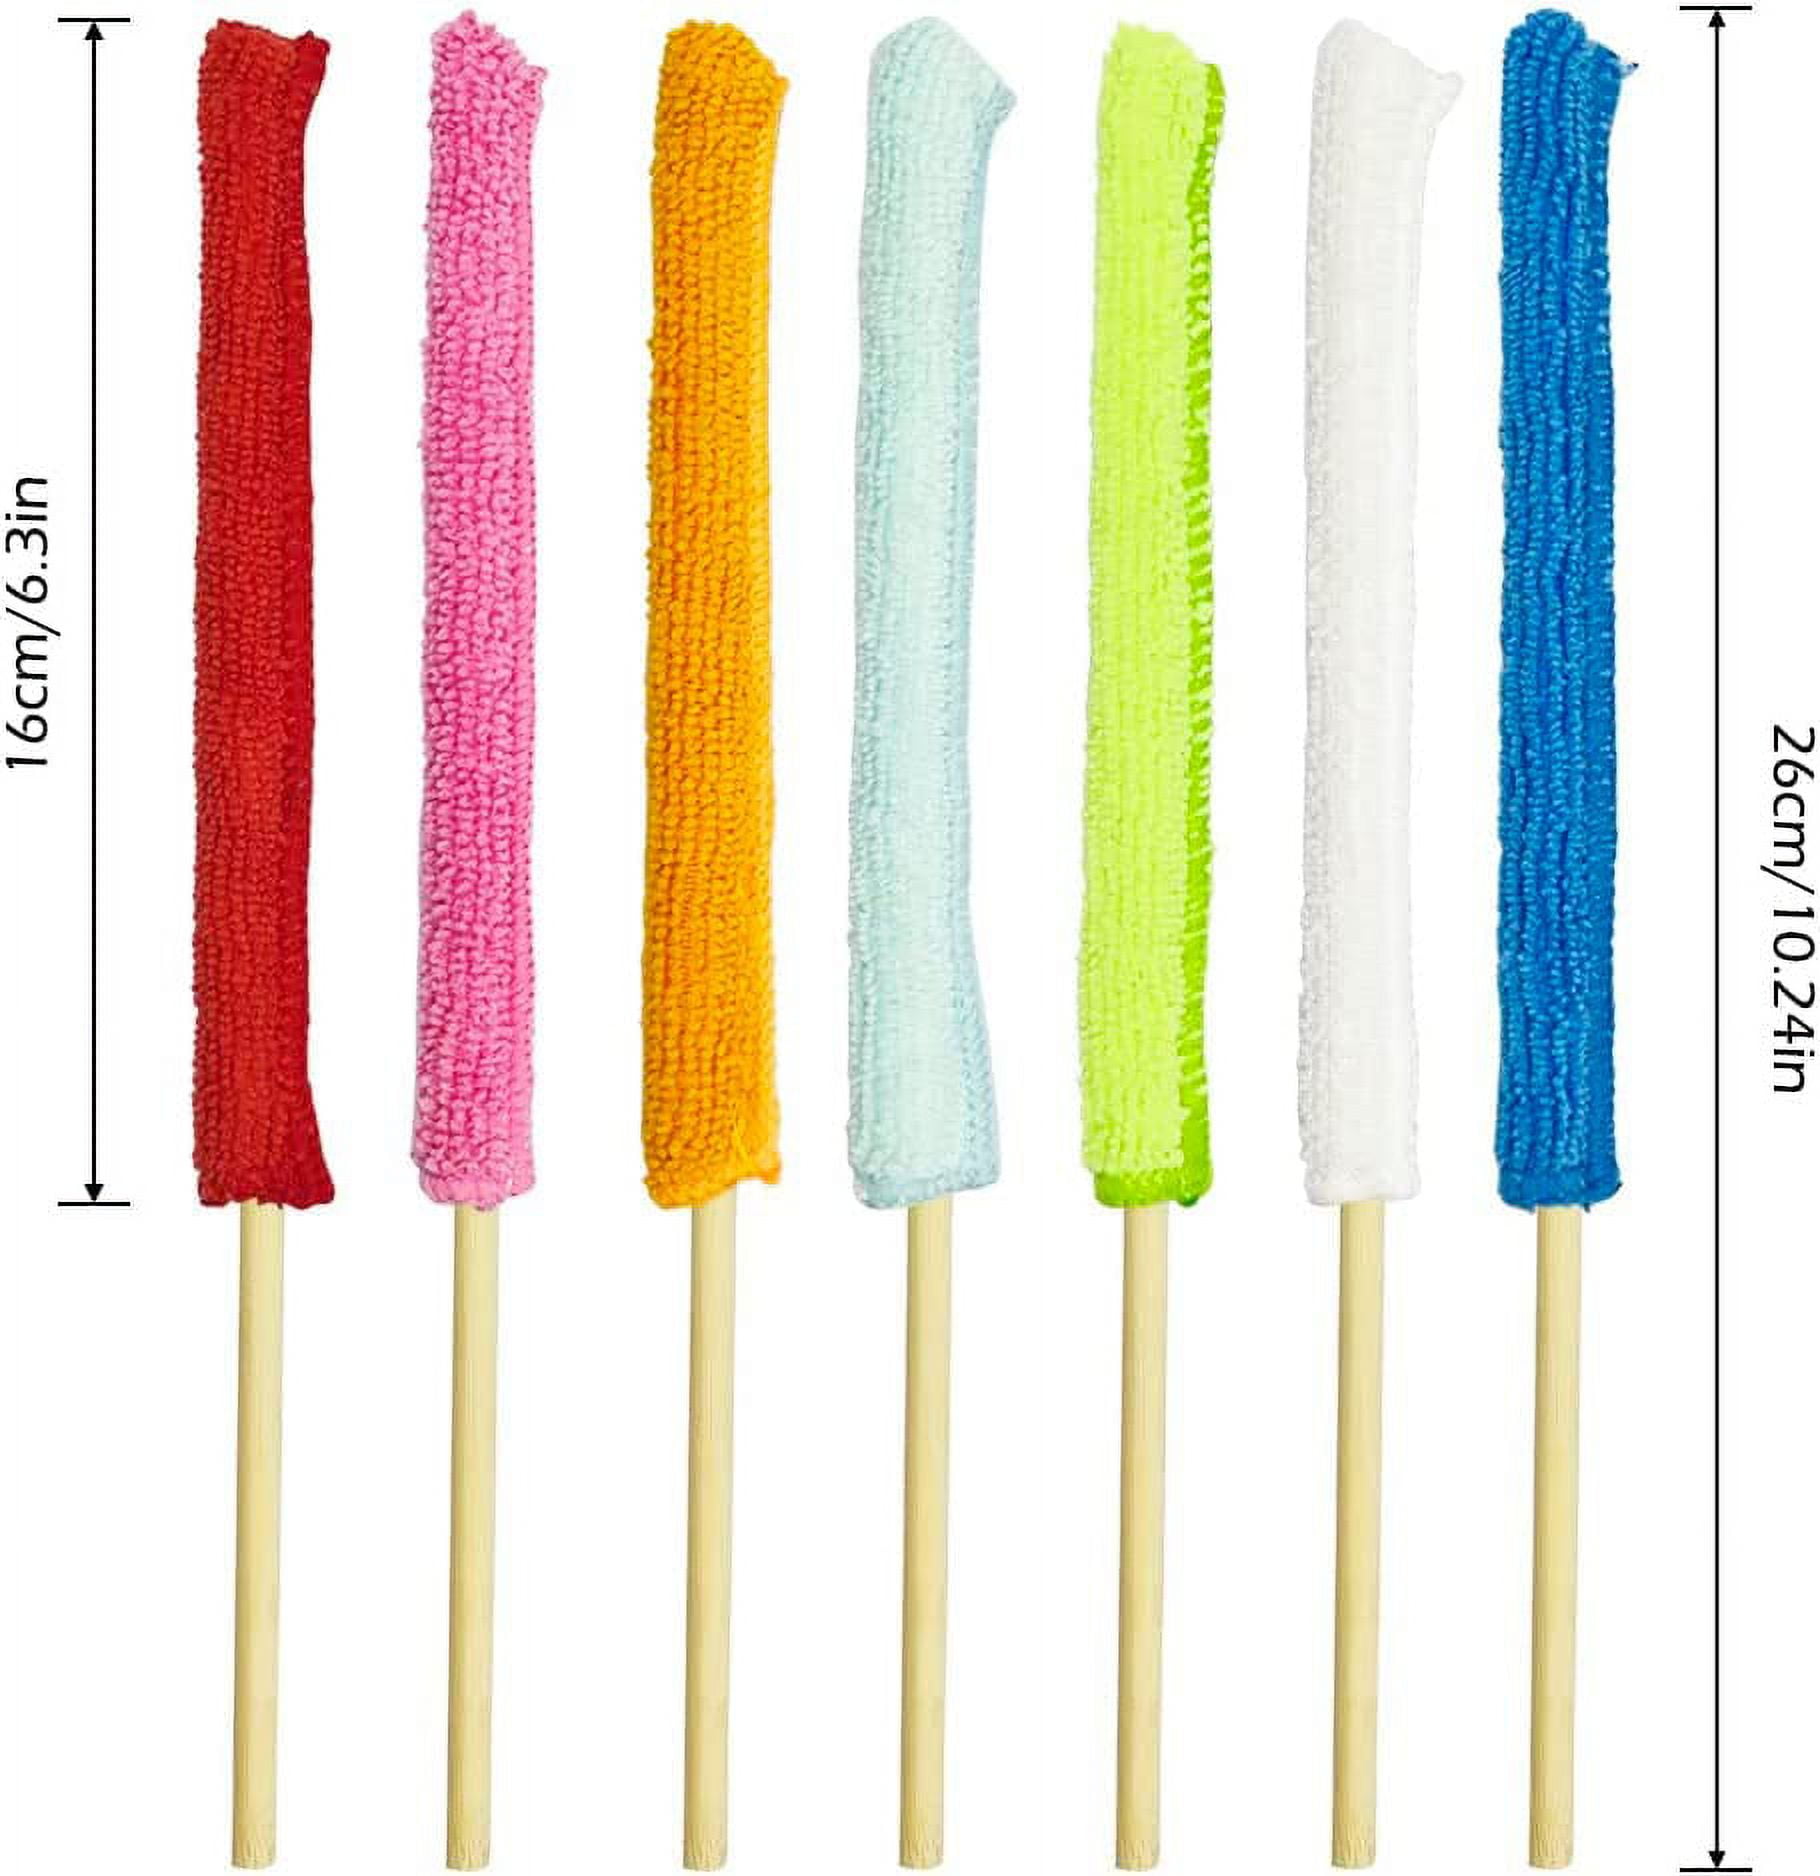  Microfiber Detail Duster Sticks Crevice Cleaning Tool Brush  Mini Detail Dusters for Cleaning Home Car Window The Smallest Spaces(12  Pieces) : Health & Household